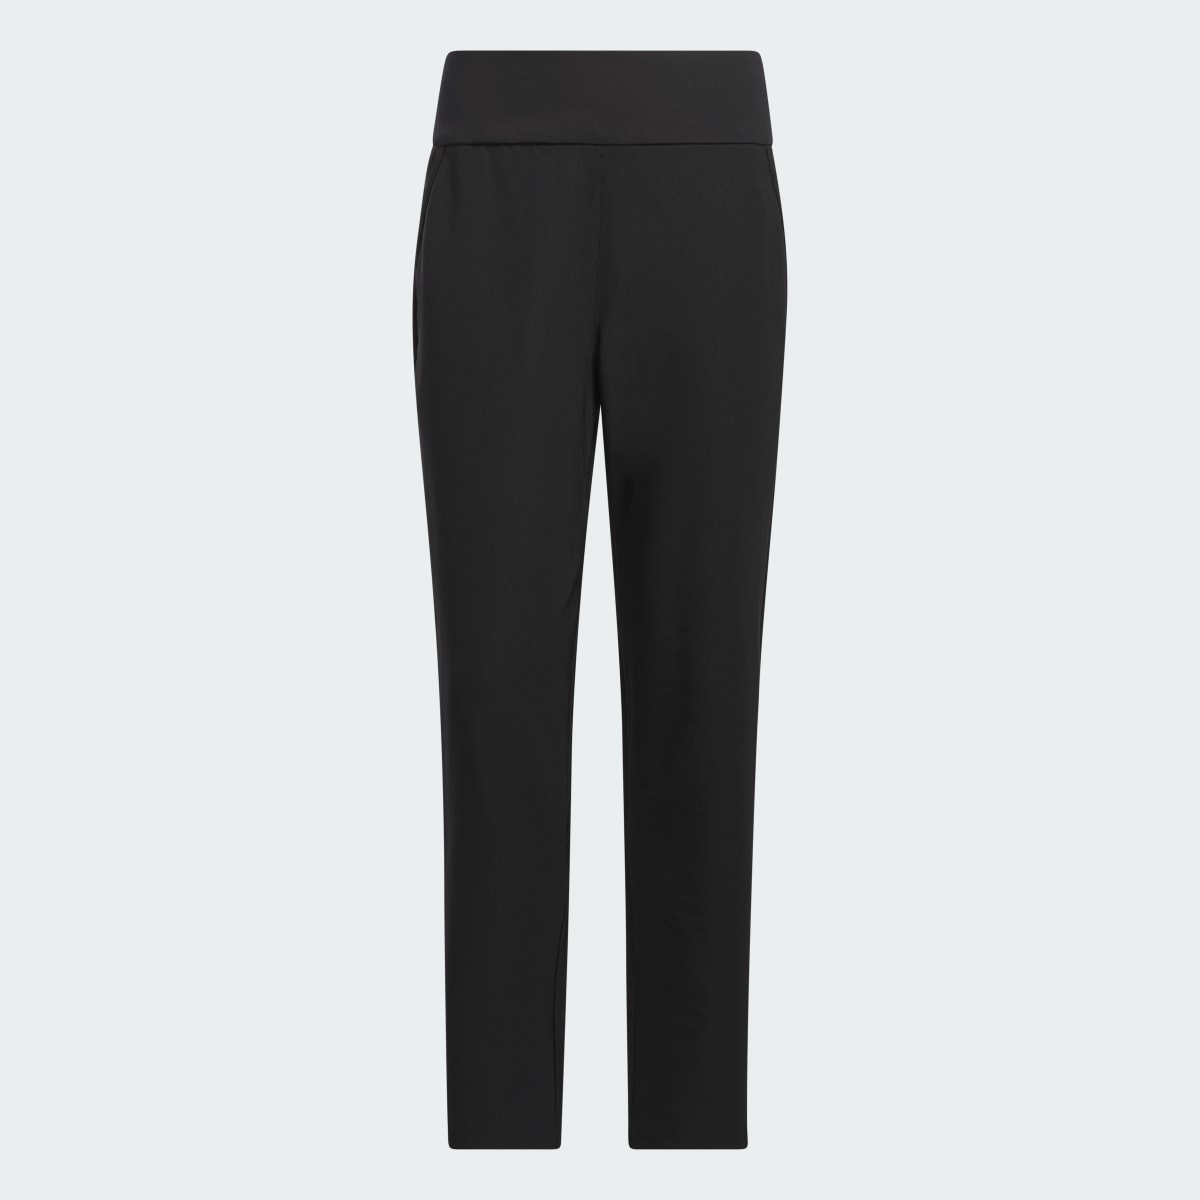 Adidas Ultimate365 Solid Ankle Pants. 4